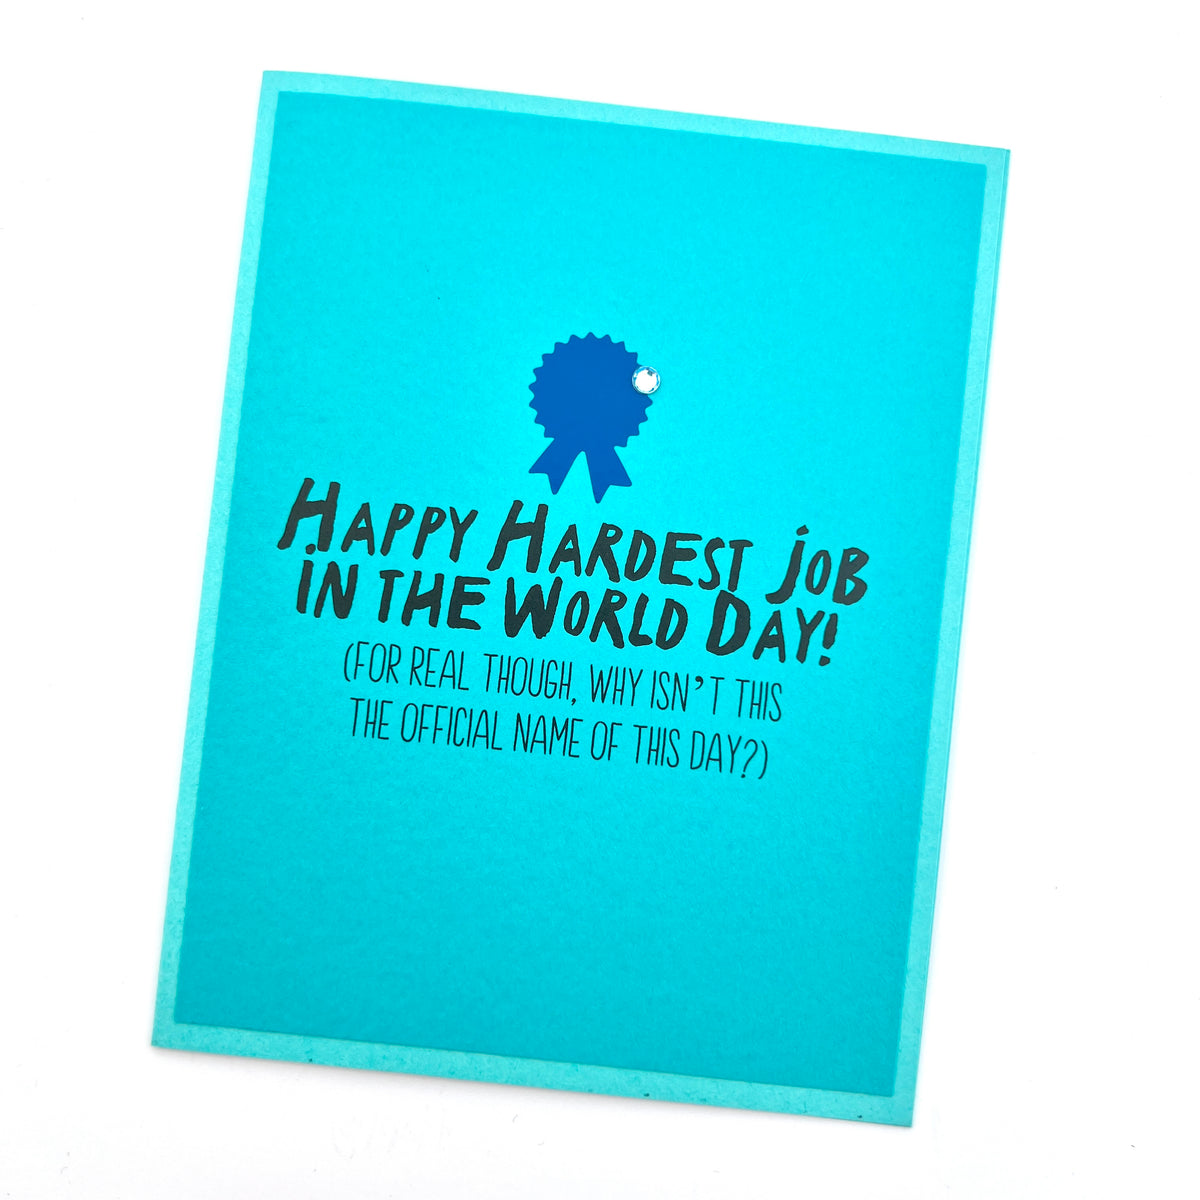 Mother’s Day/Father’s Day Hardest Job in the World Day card